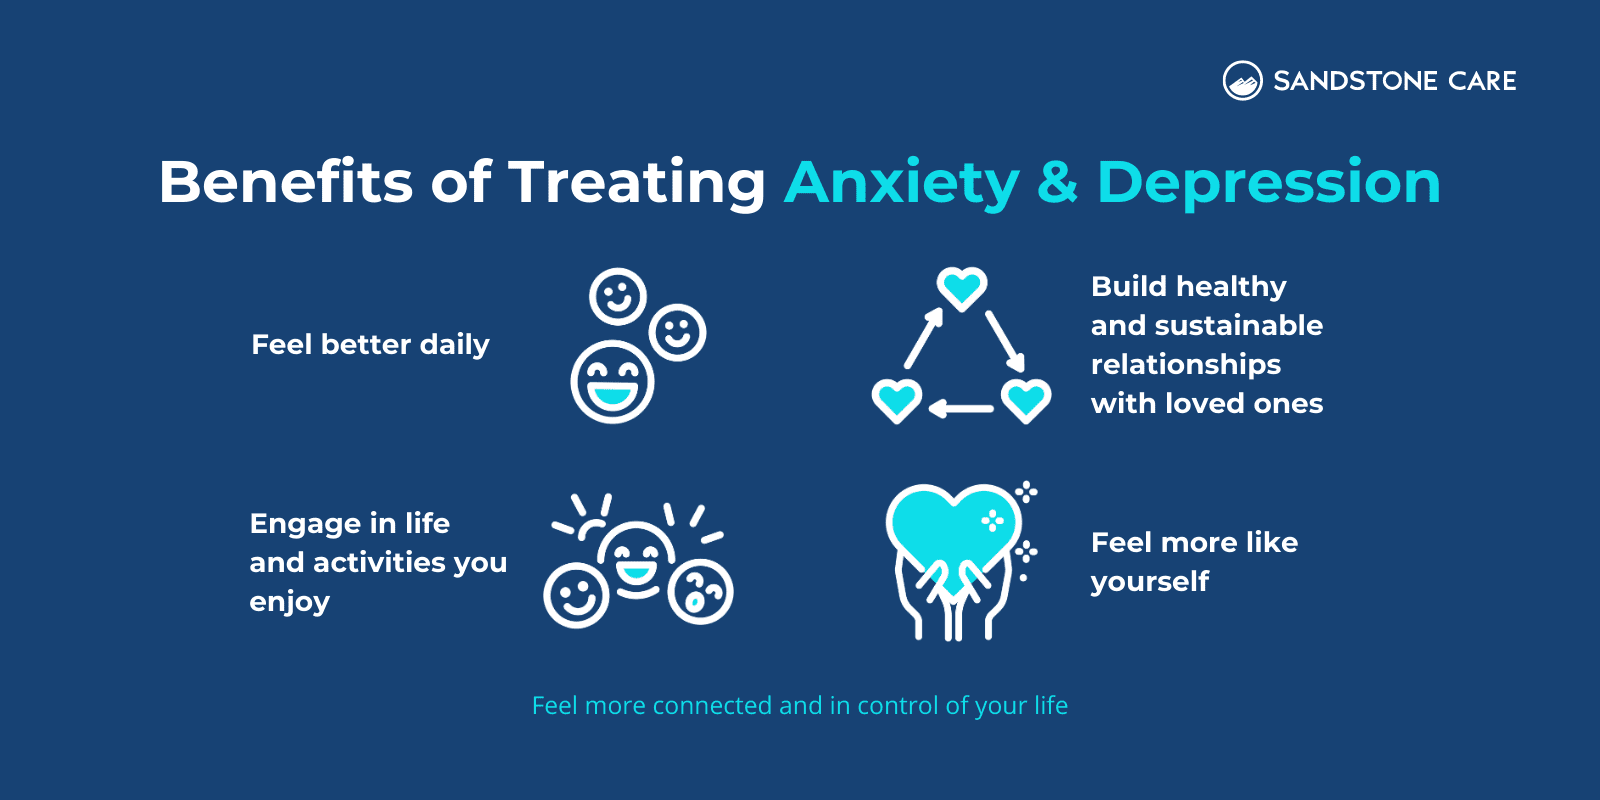 4 Benefits of treating anxiety & depression illustrated with relevant icons and explanations